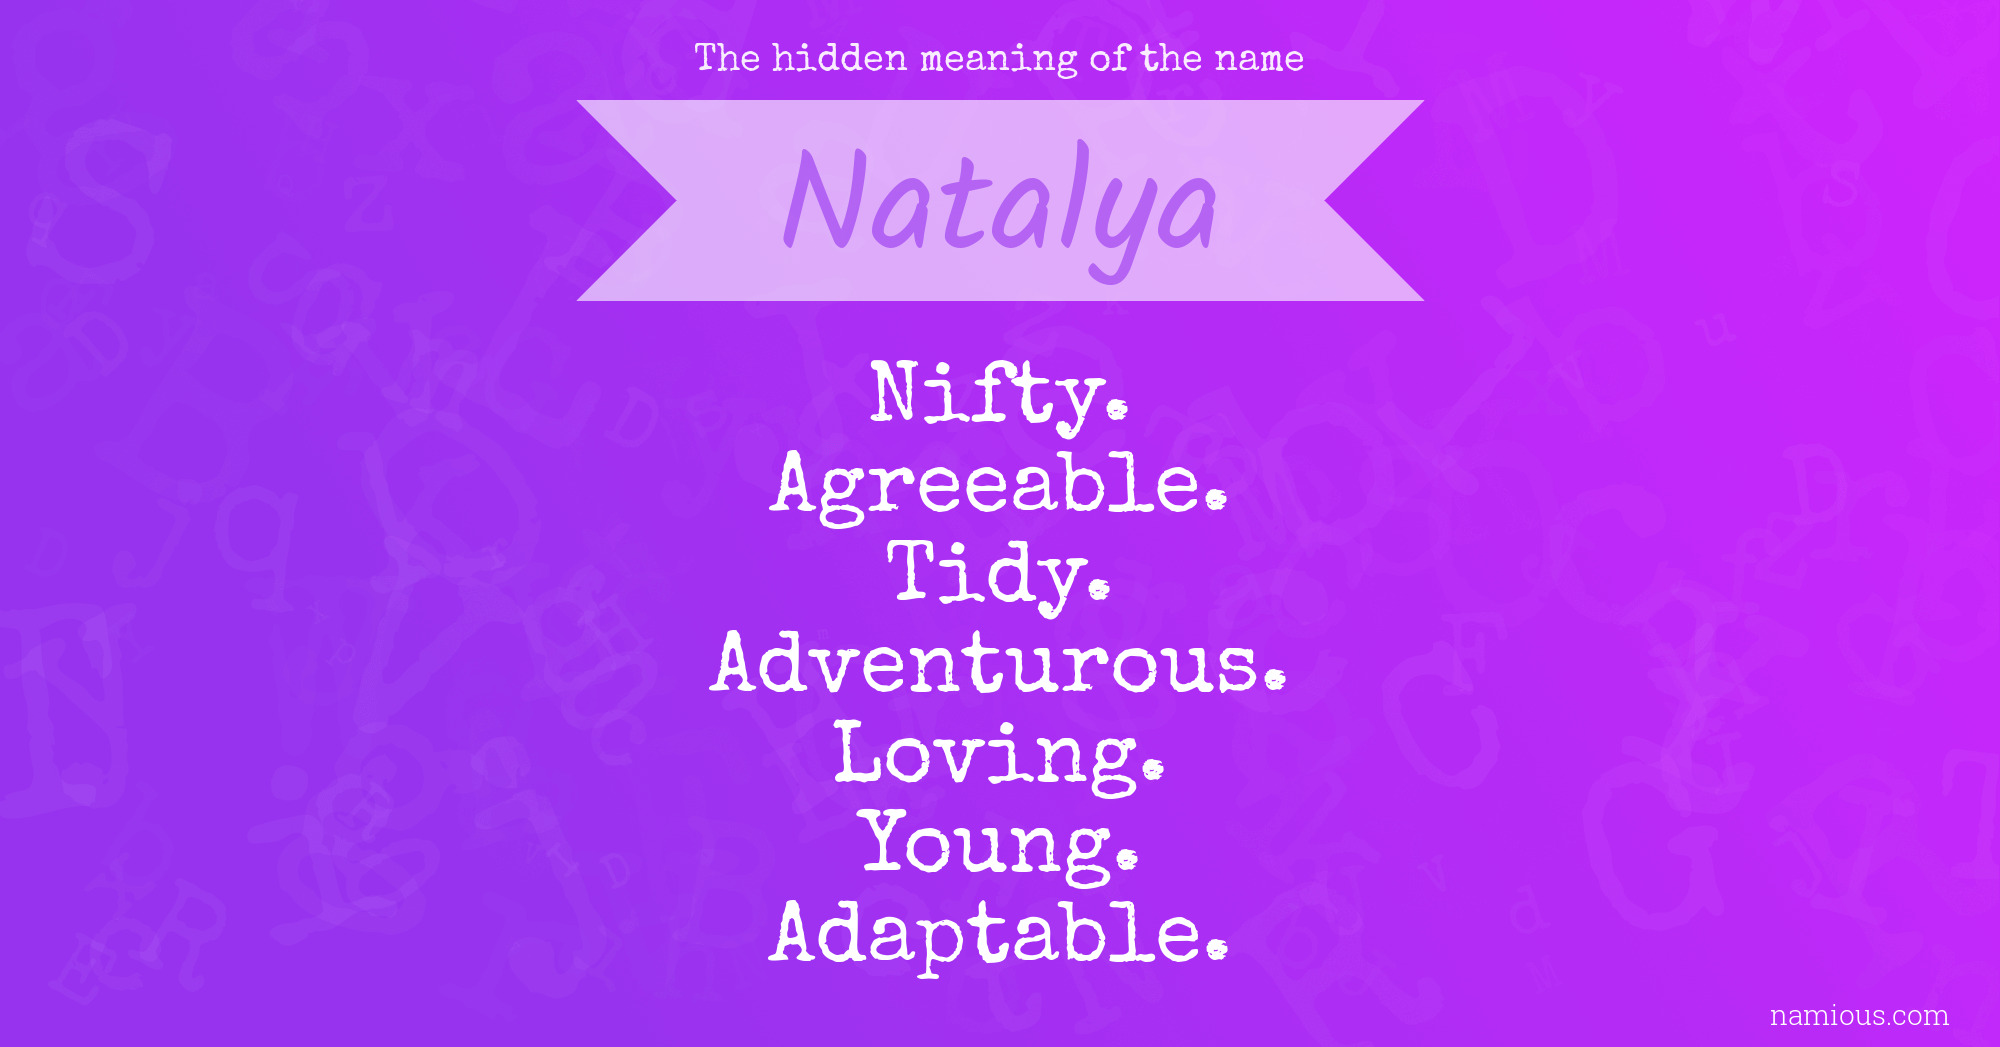 The hidden meaning of the name Natalya